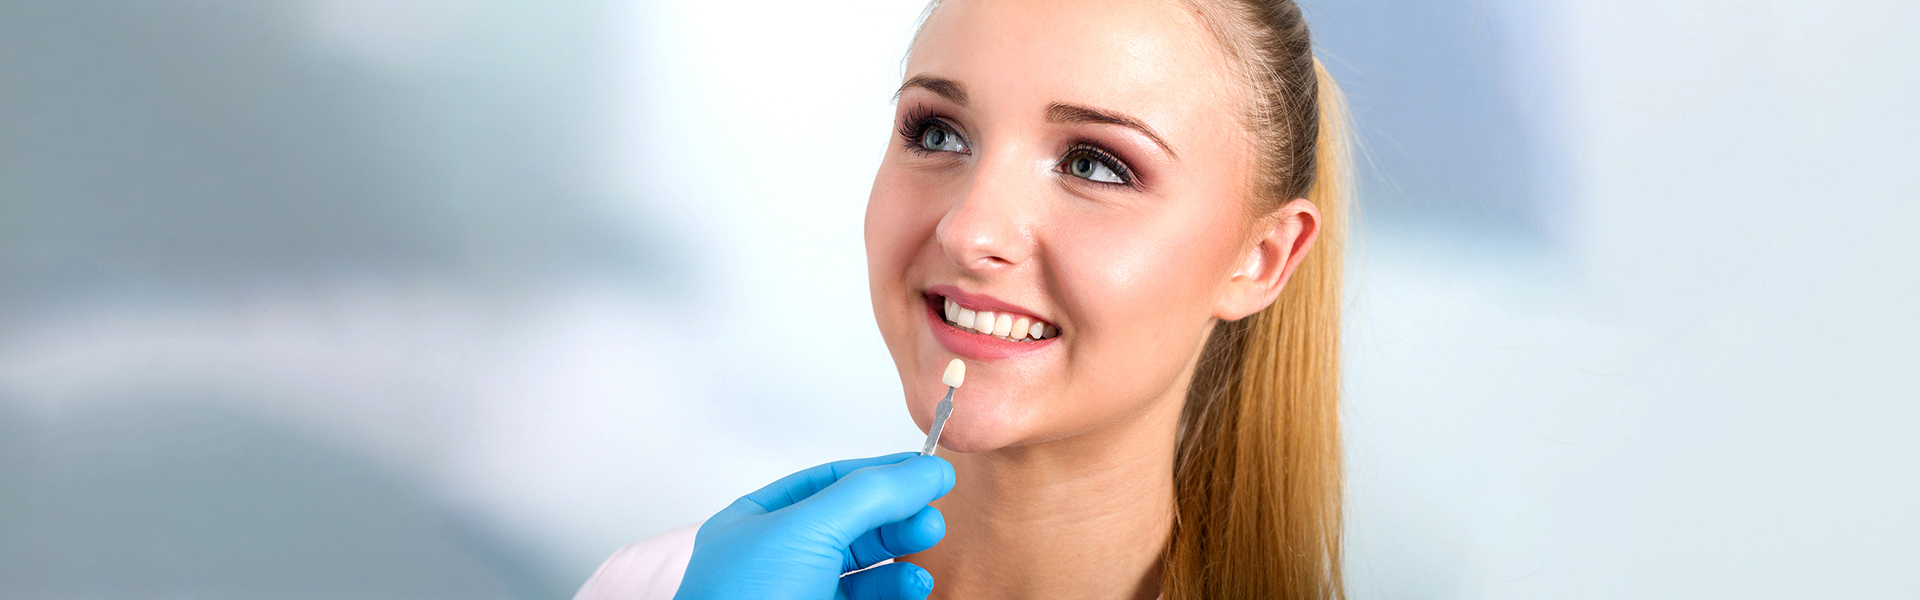 Dental Veneers: The Go-to Option for Correcting Minor Dental Flaws